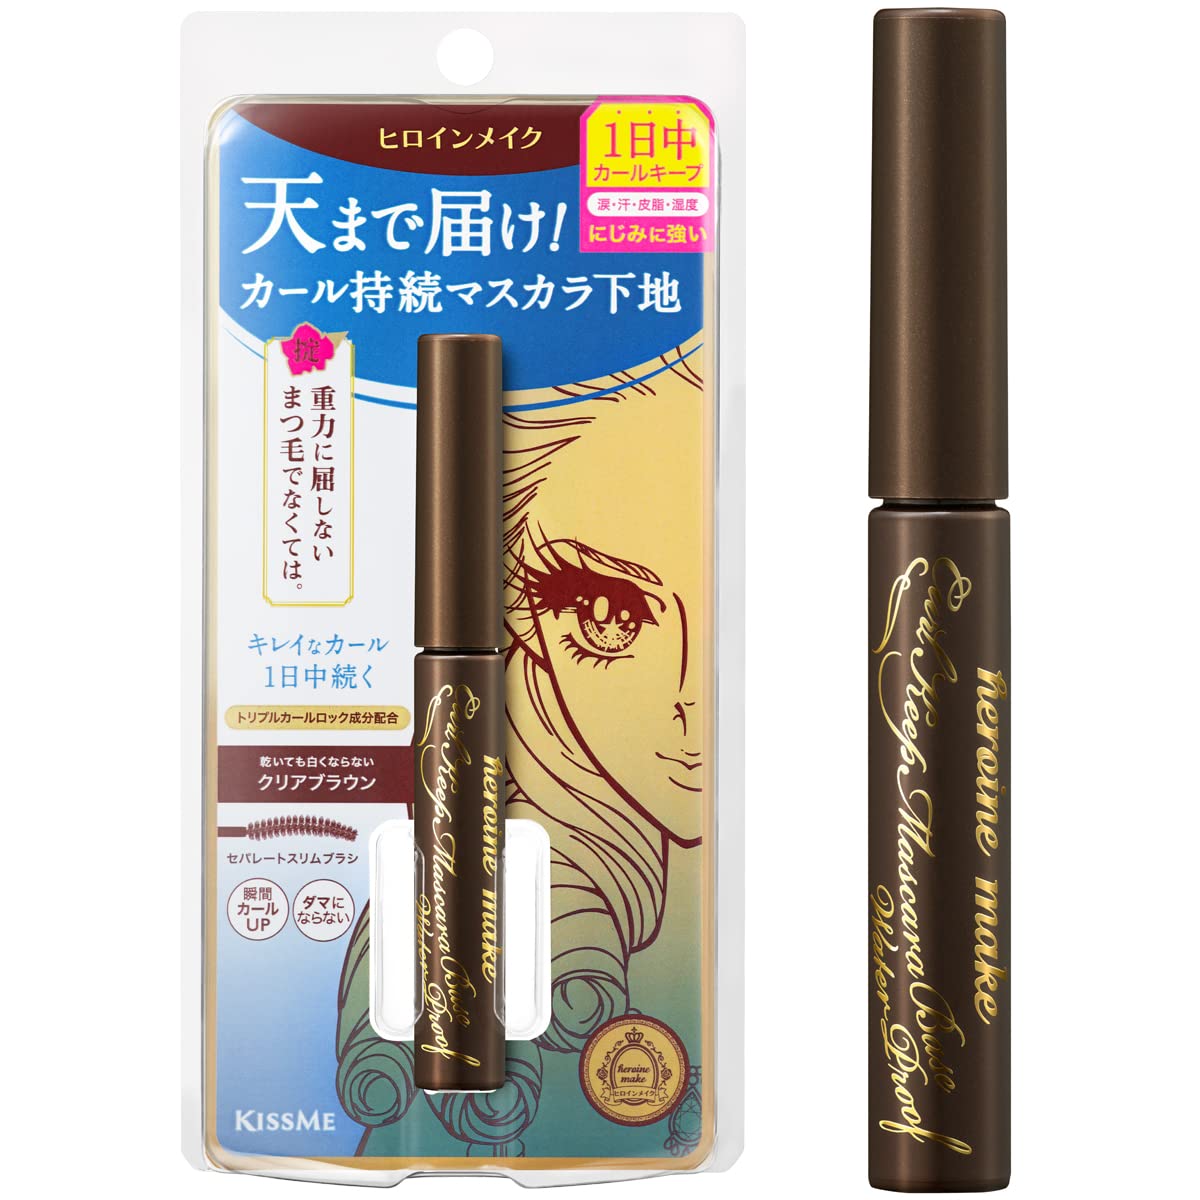 Fasio Ultra WP Mascara 00 Clear 6G Waterproof Curl Keep Smudge Resistant